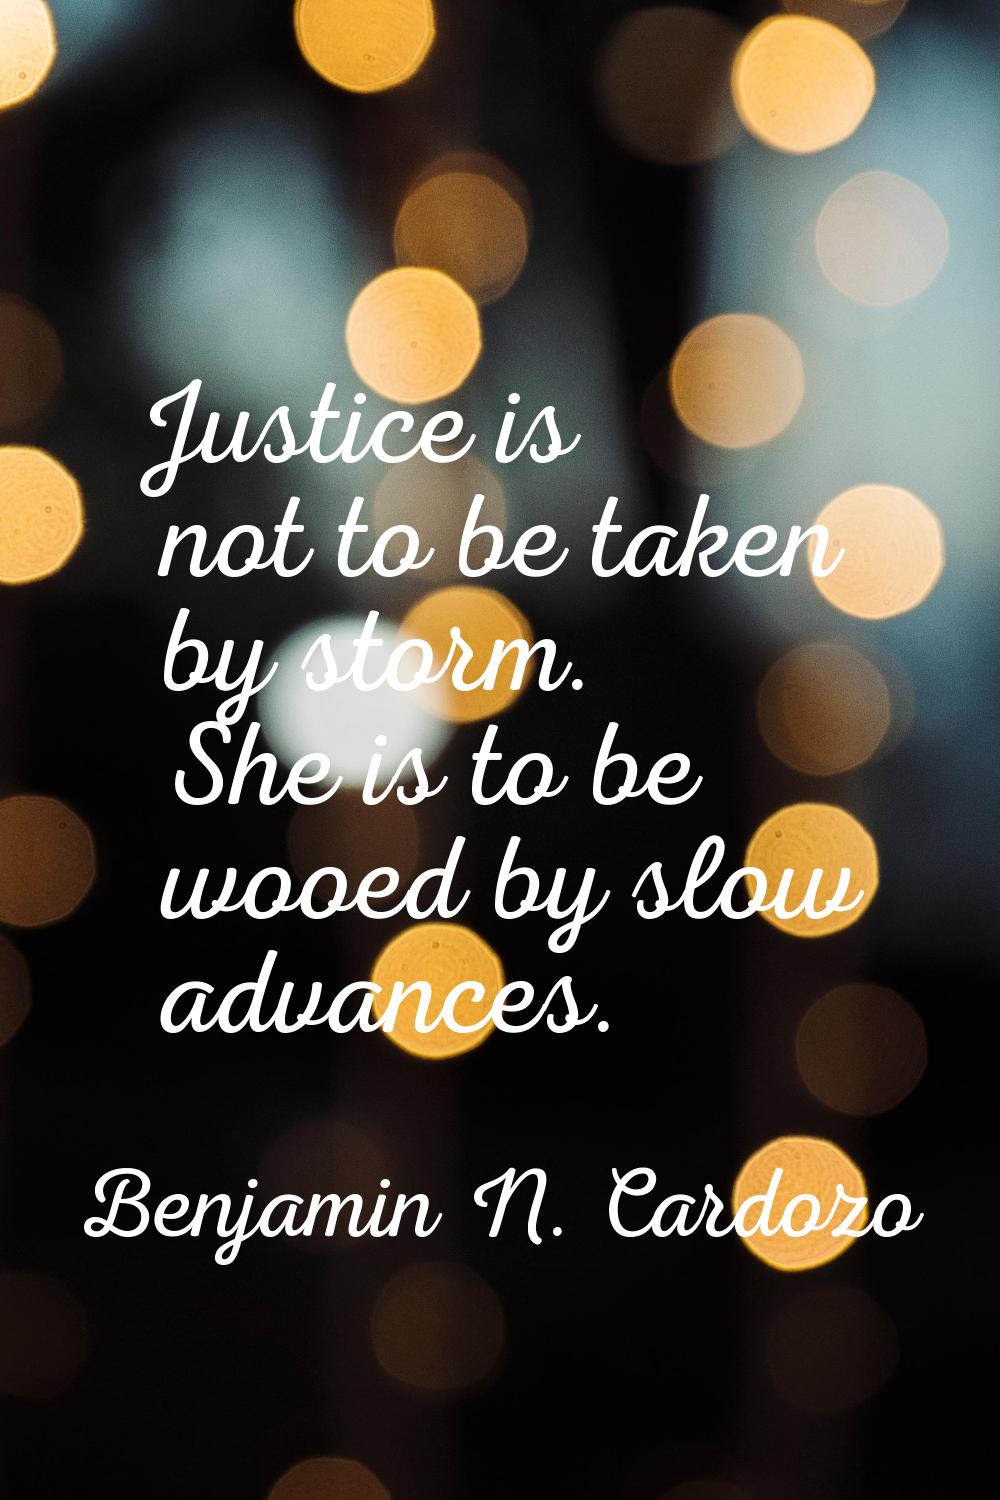 Justice is not to be taken by storm. She is to be wooed by slow advances.